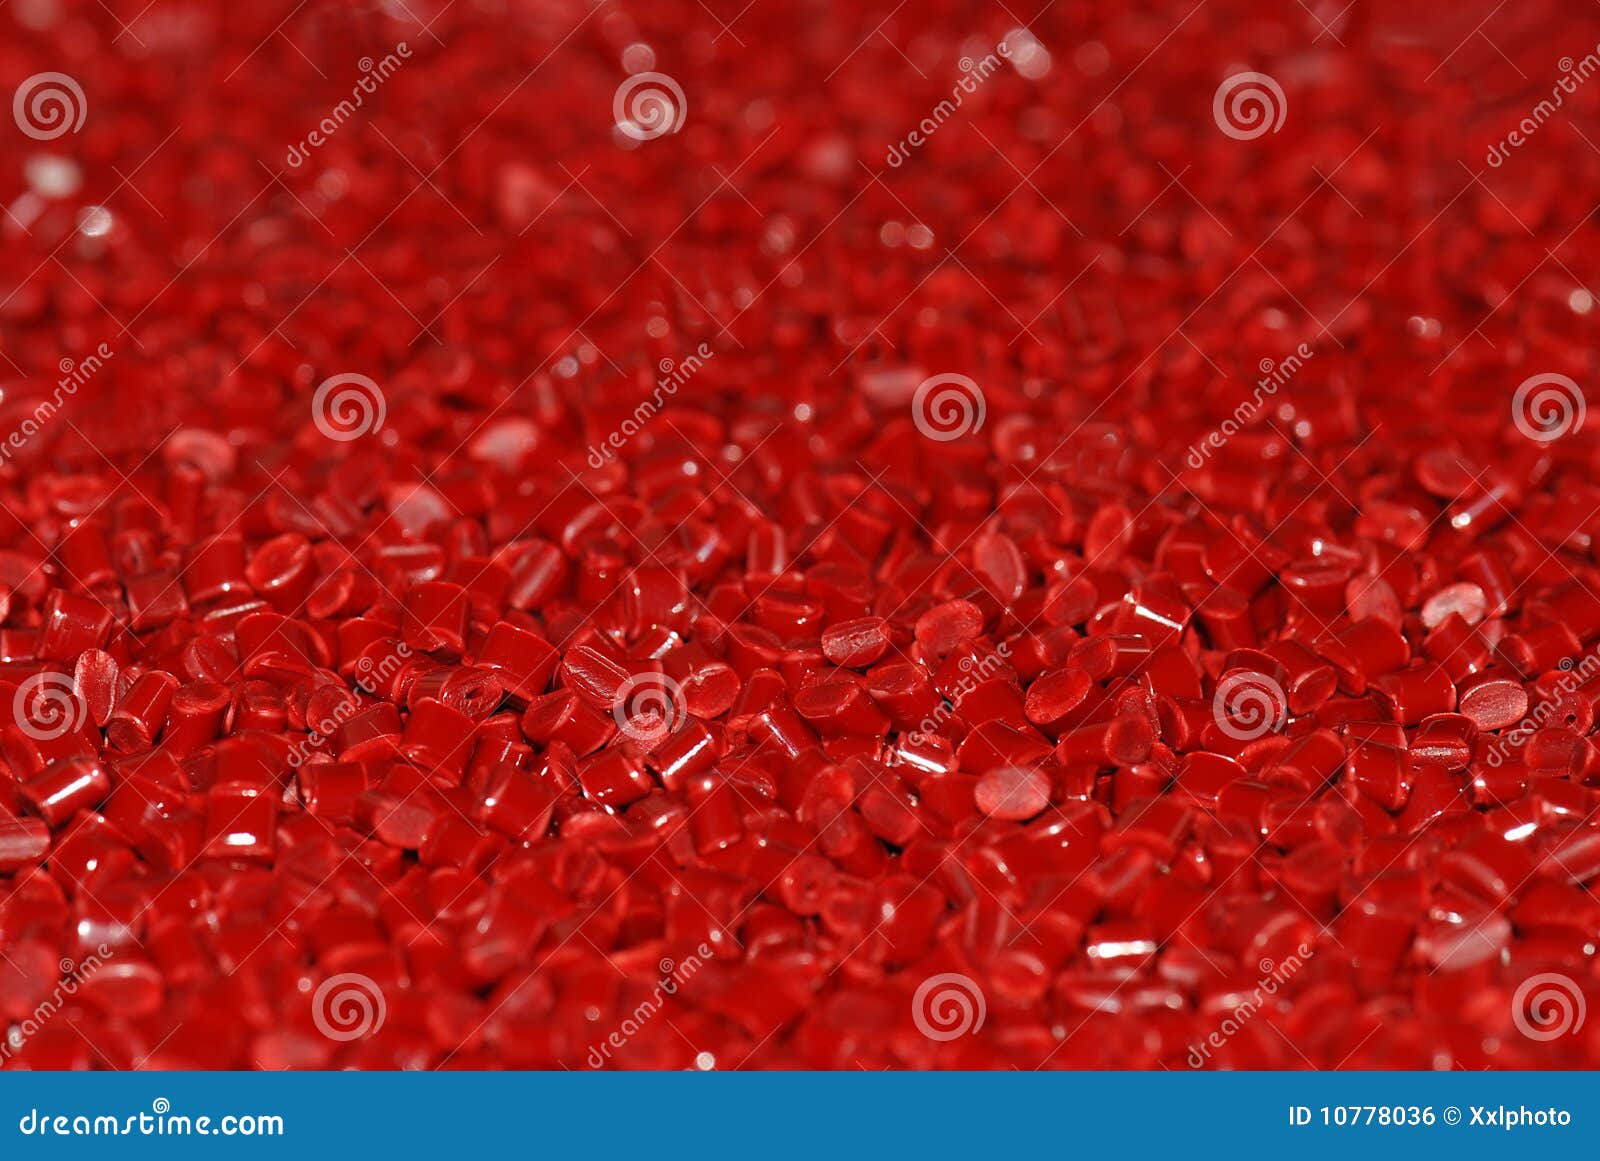 red thermoplastic resin